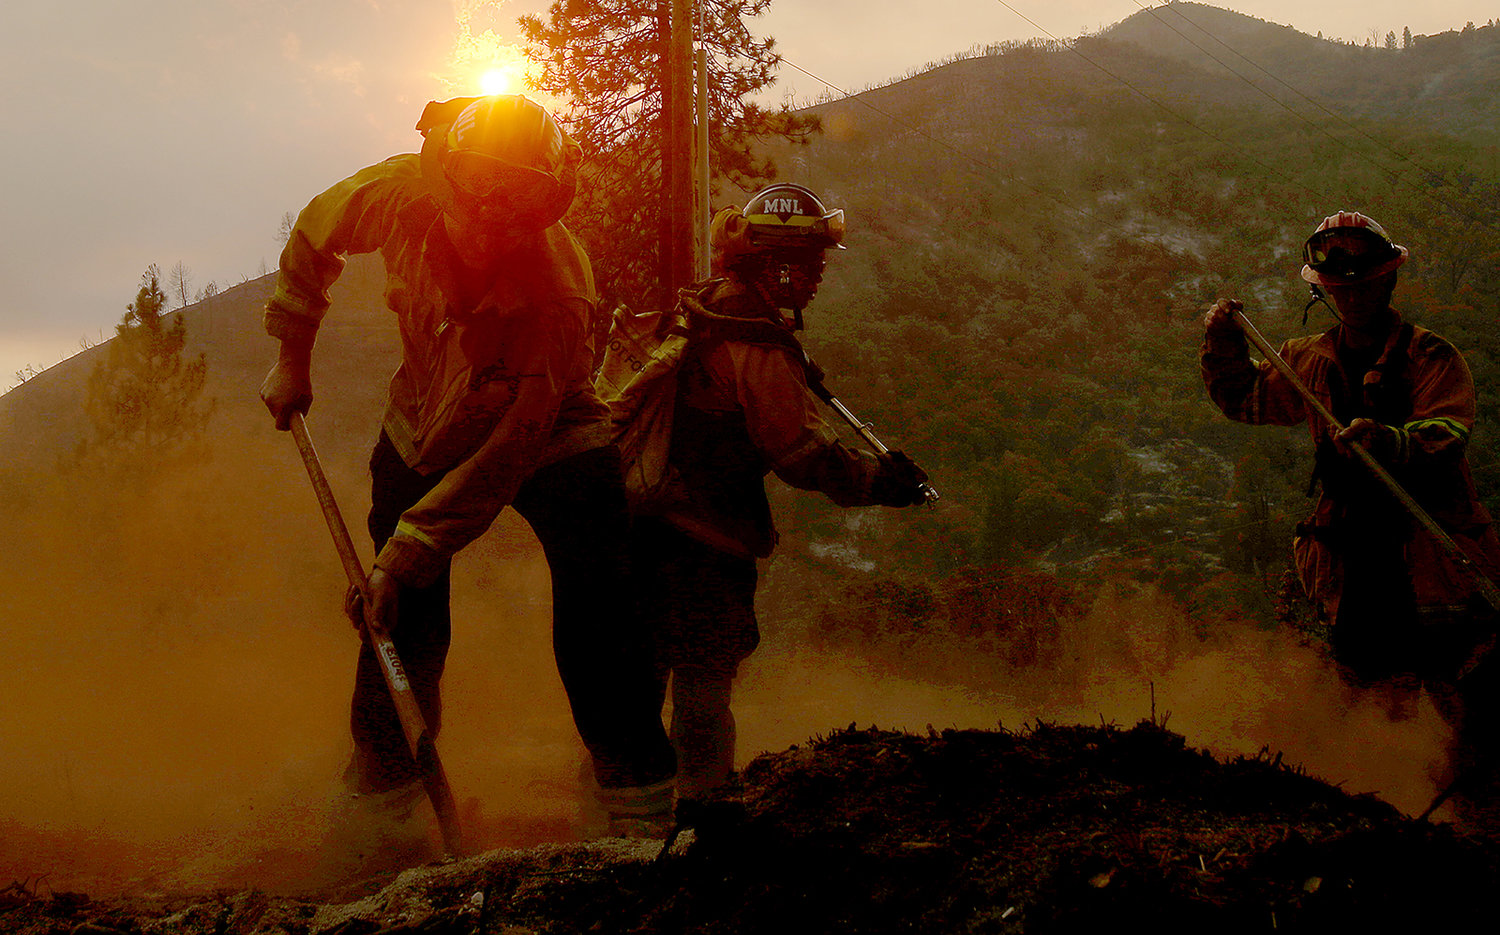 Firefighters put out hotspots from the Oak fire along Darrah Road near Mariposa on Tuesday, July 26, 2022. (Luis Sinco/Los Angeles Times/TNS)